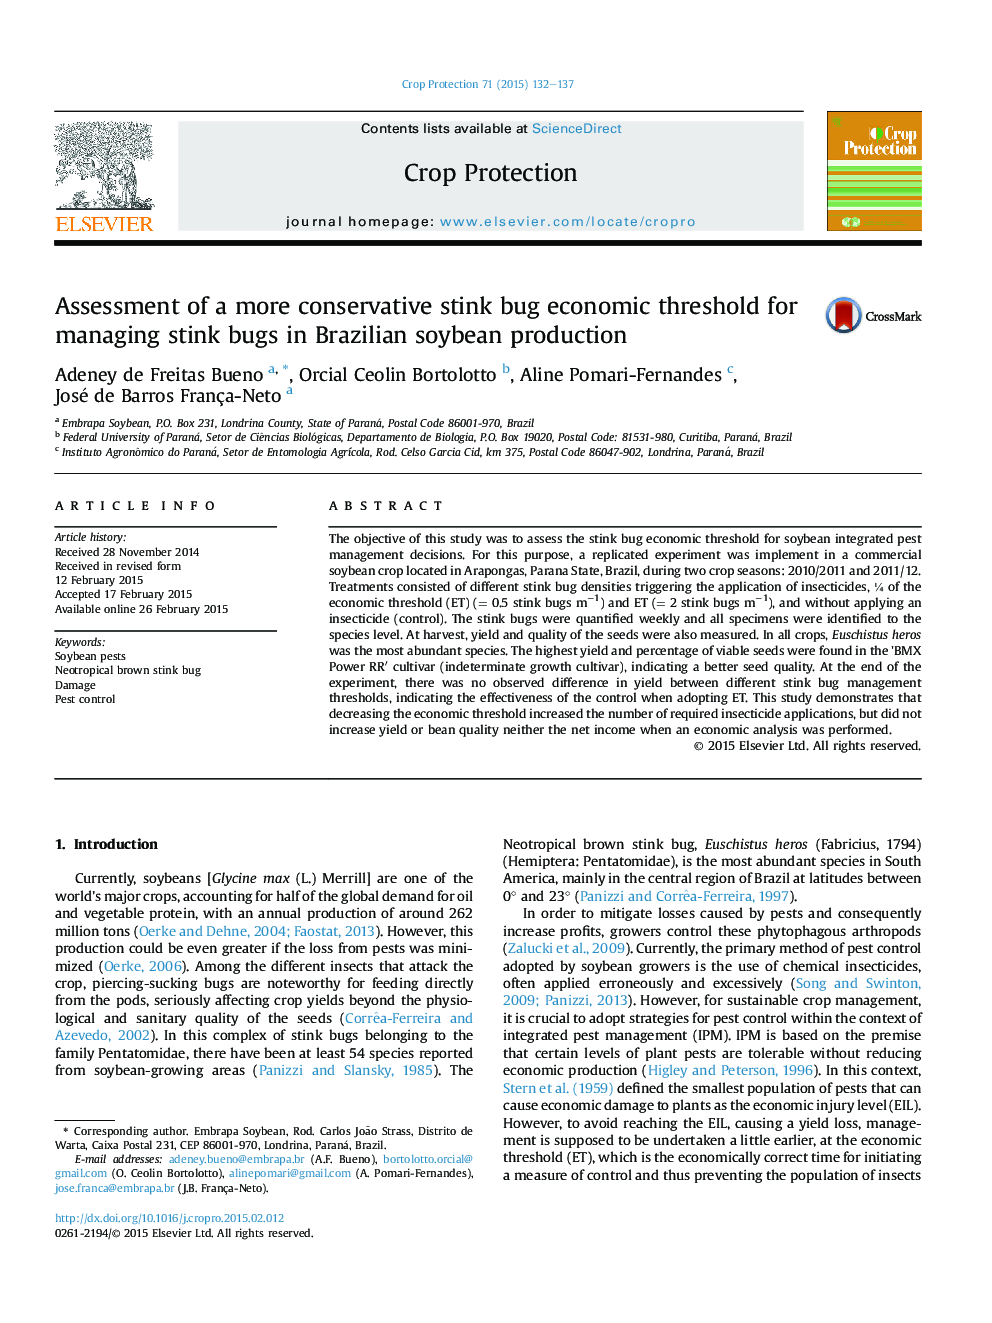 Assessment of a more conservative stink bug economic threshold for managing stink bugs in Brazilian soybean production